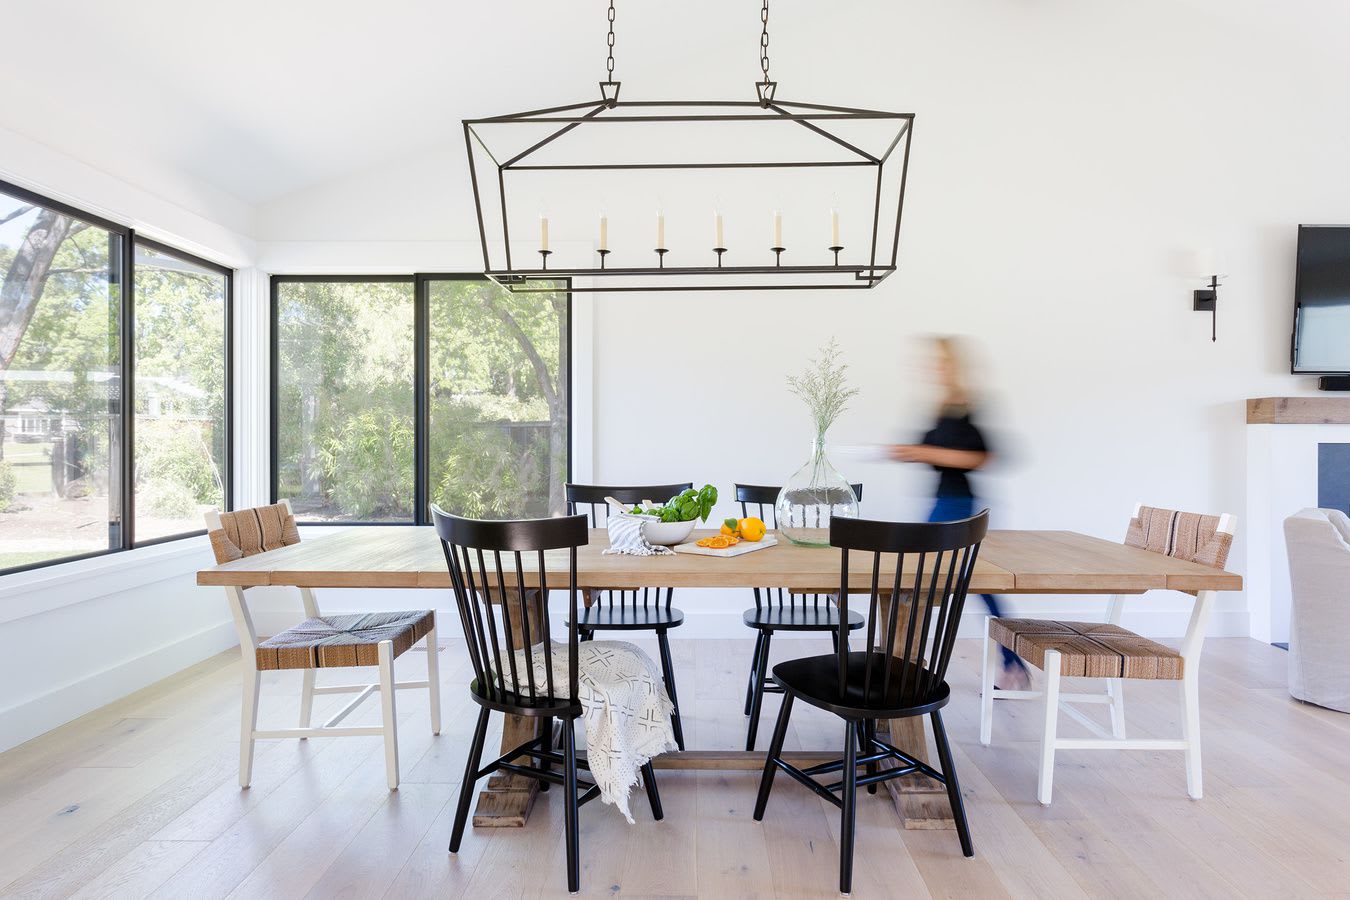 The Dos and Don'ts of Mastering the Mismatched Dining Chair Trend